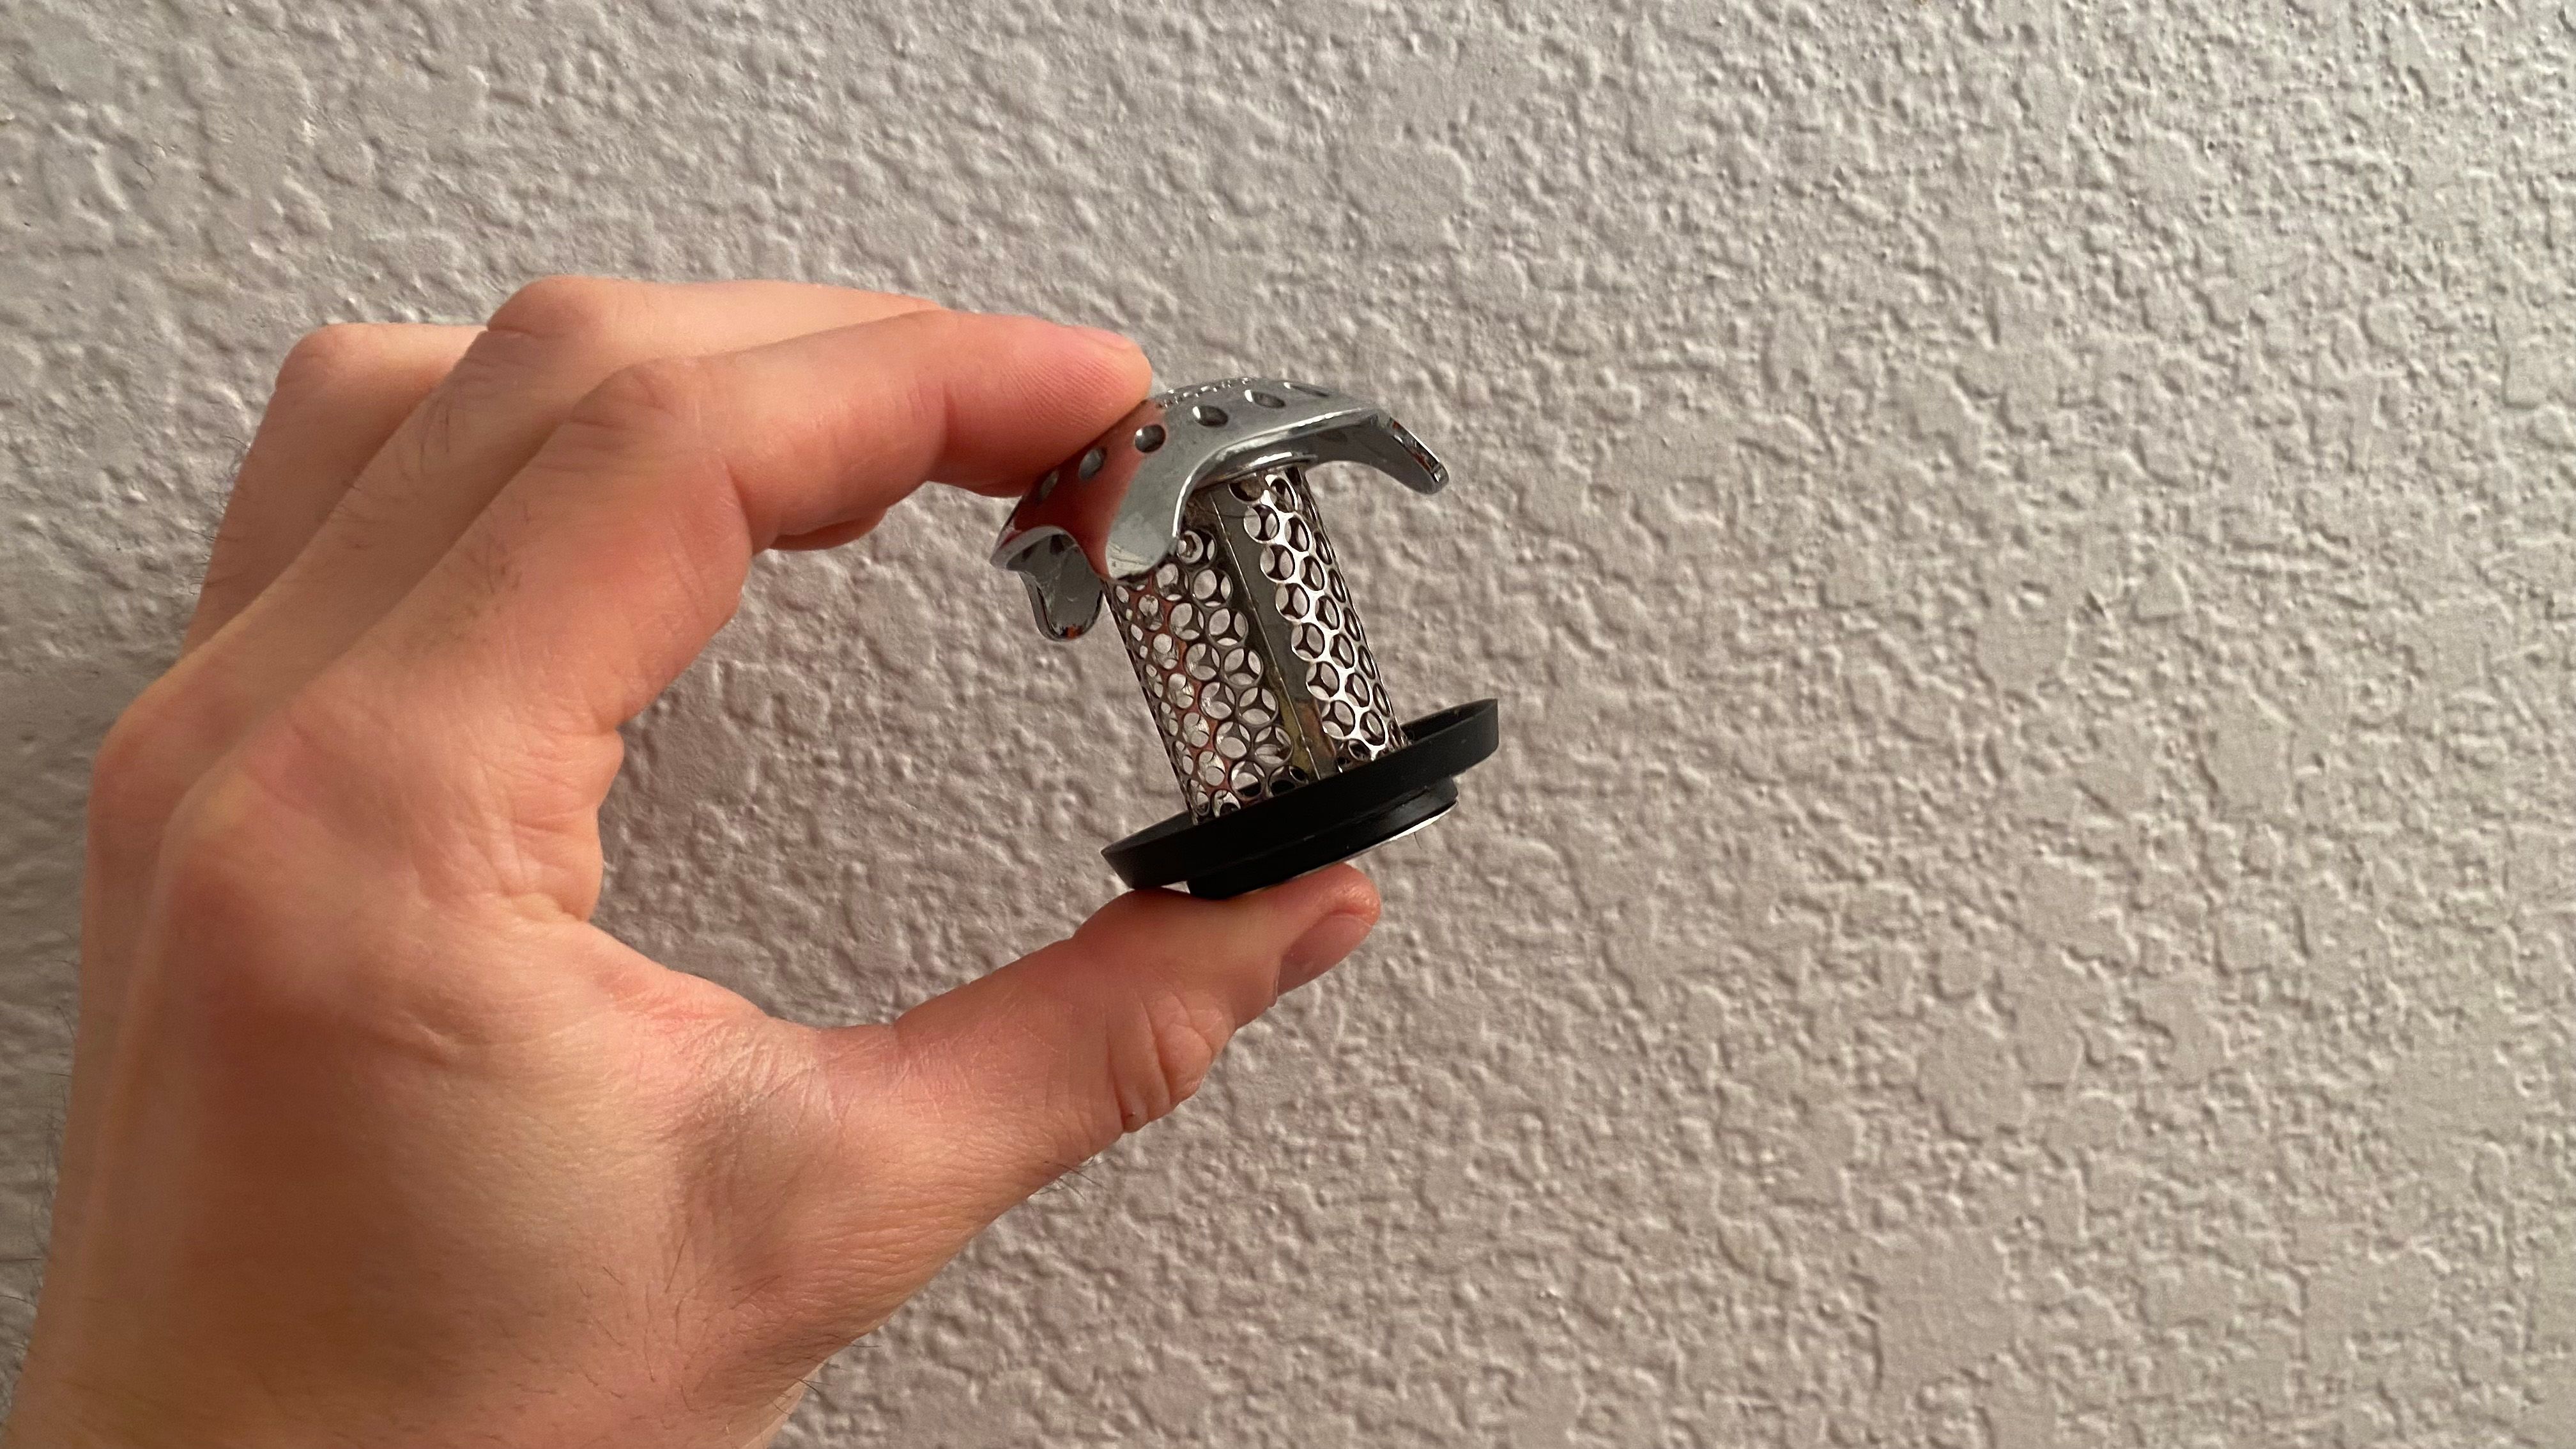 This $13 TubShroom drain protector has nearly 27K reviews on